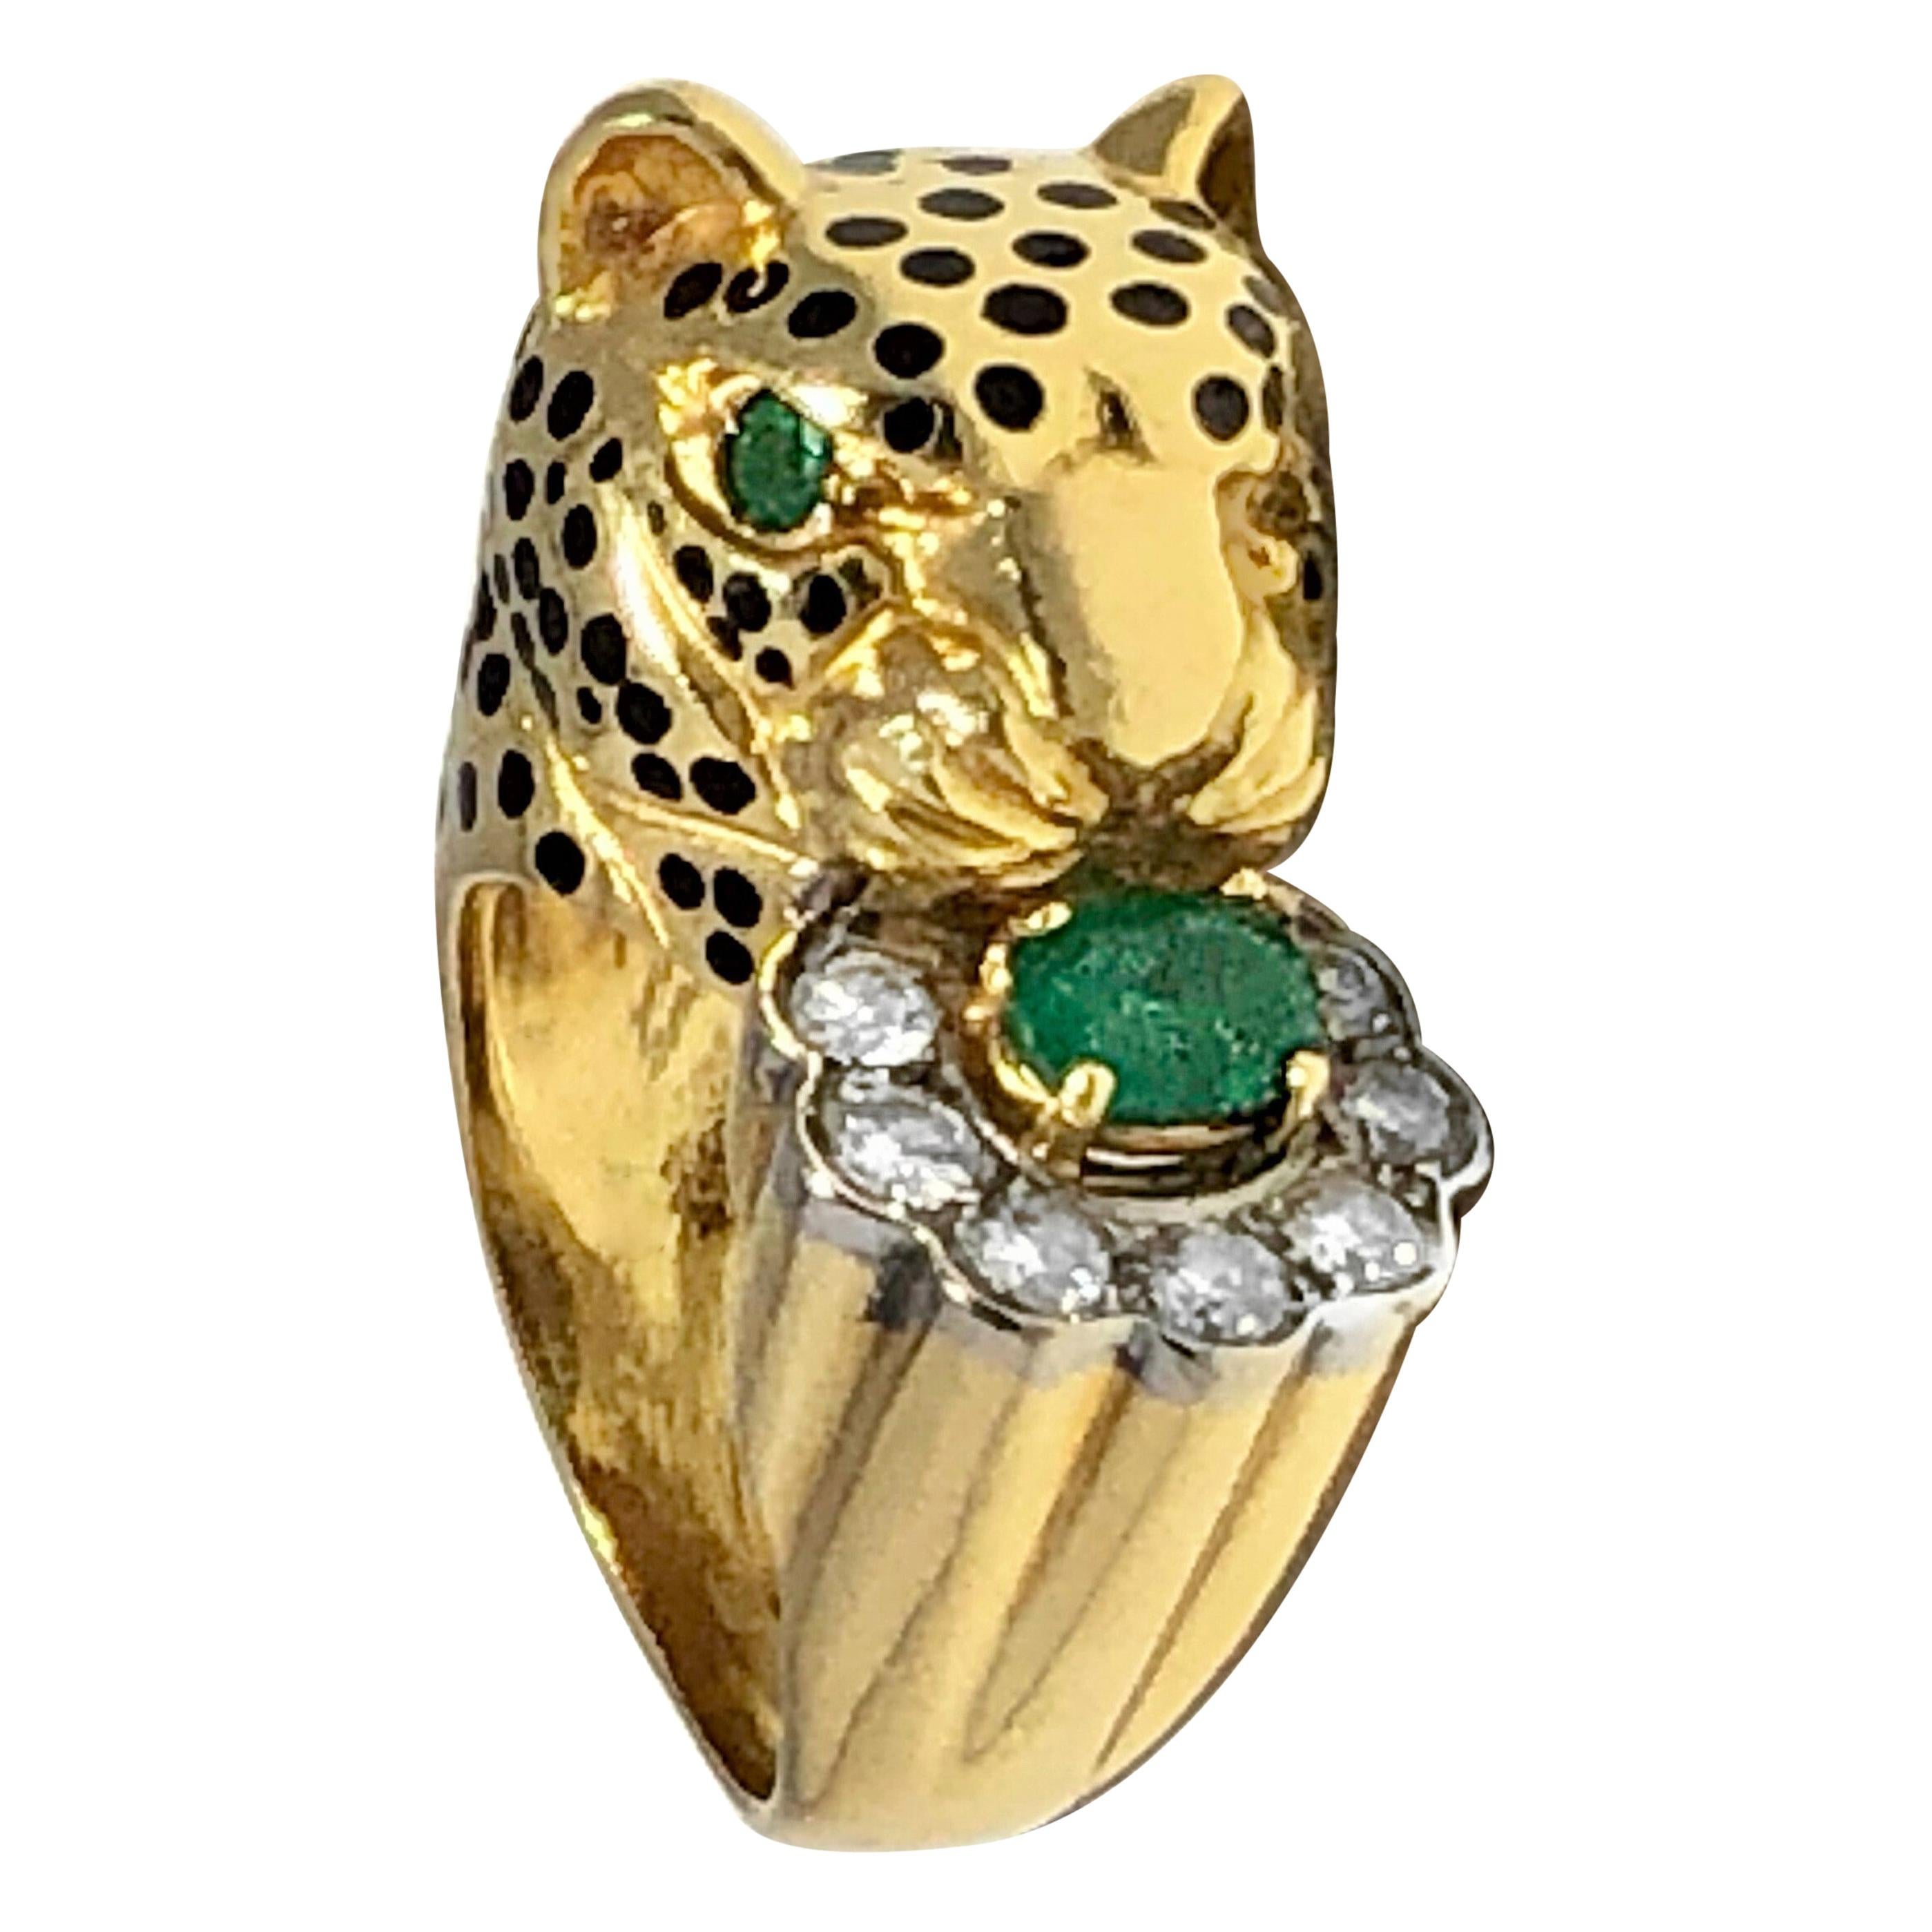 Leopard Ring by Emis Beros in Yellow Gold, Platinum, Diamond, Emerald and Enamel